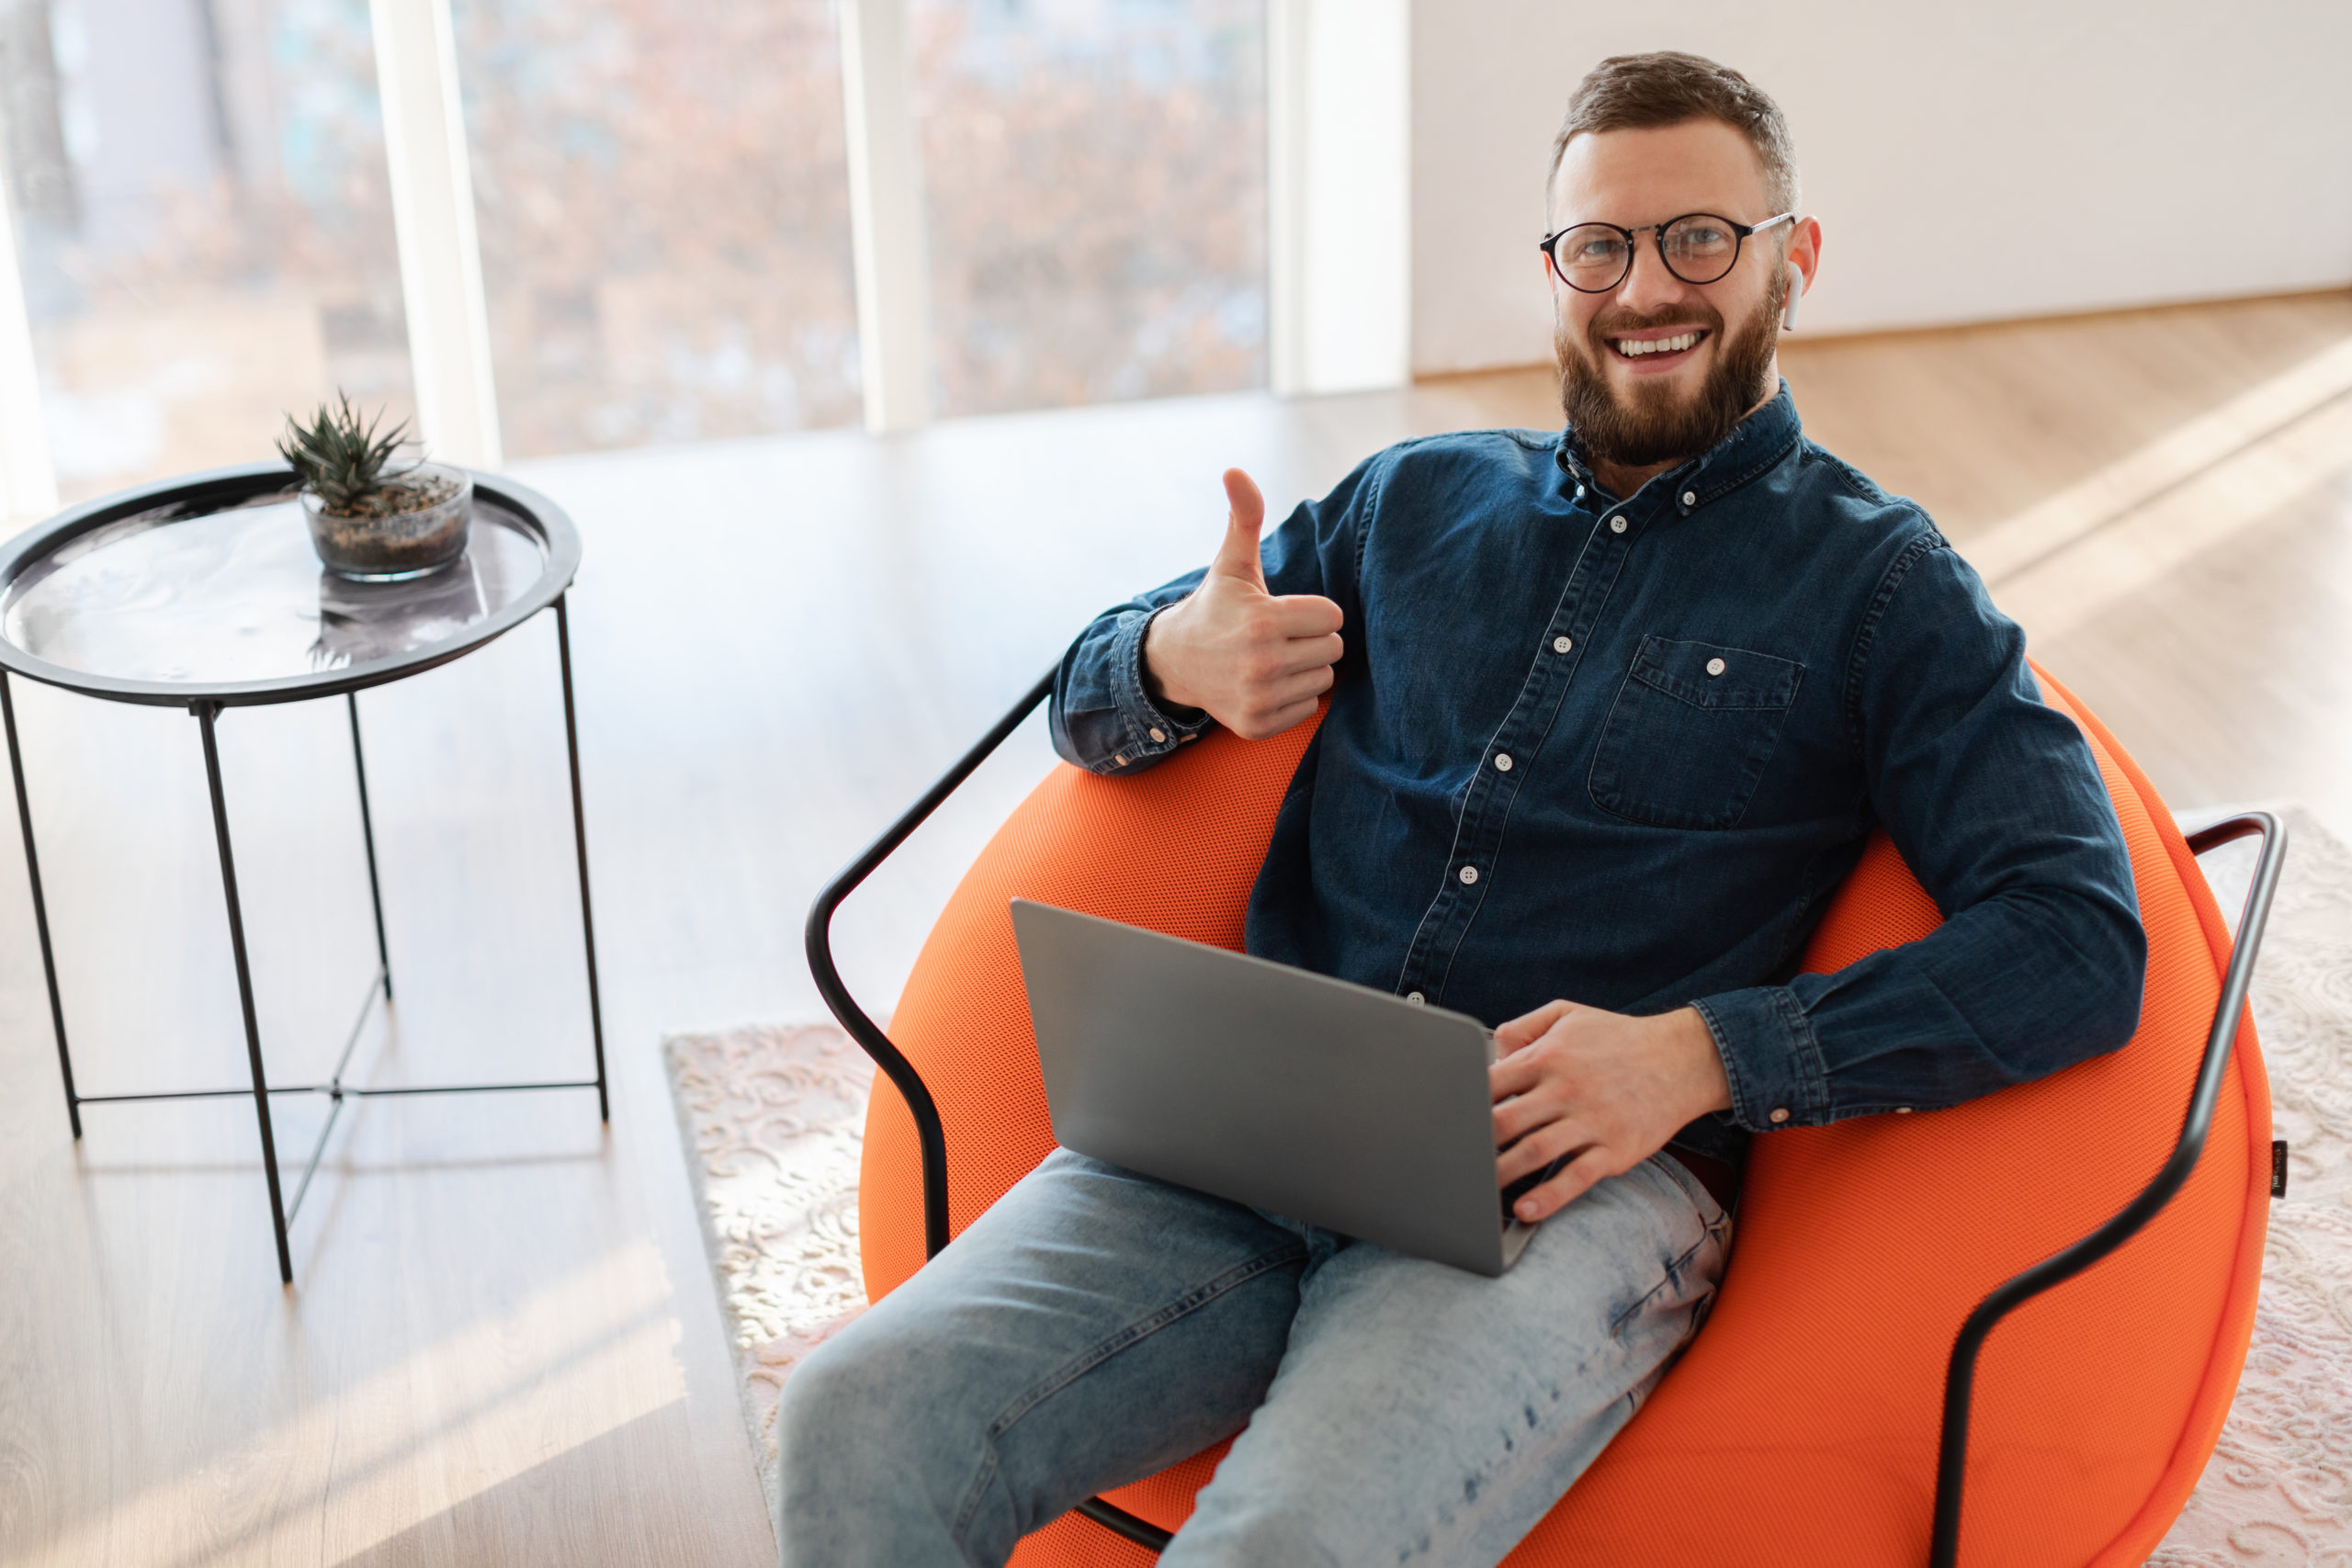 Smiling Male Freelancer Using Laptop Computer Gesturing Thumbs Up Approving Website For Distance Freelance Work Looking At Camera Sitting In Chair At Home, Wearing Eyeglasses. I Like Remote Job